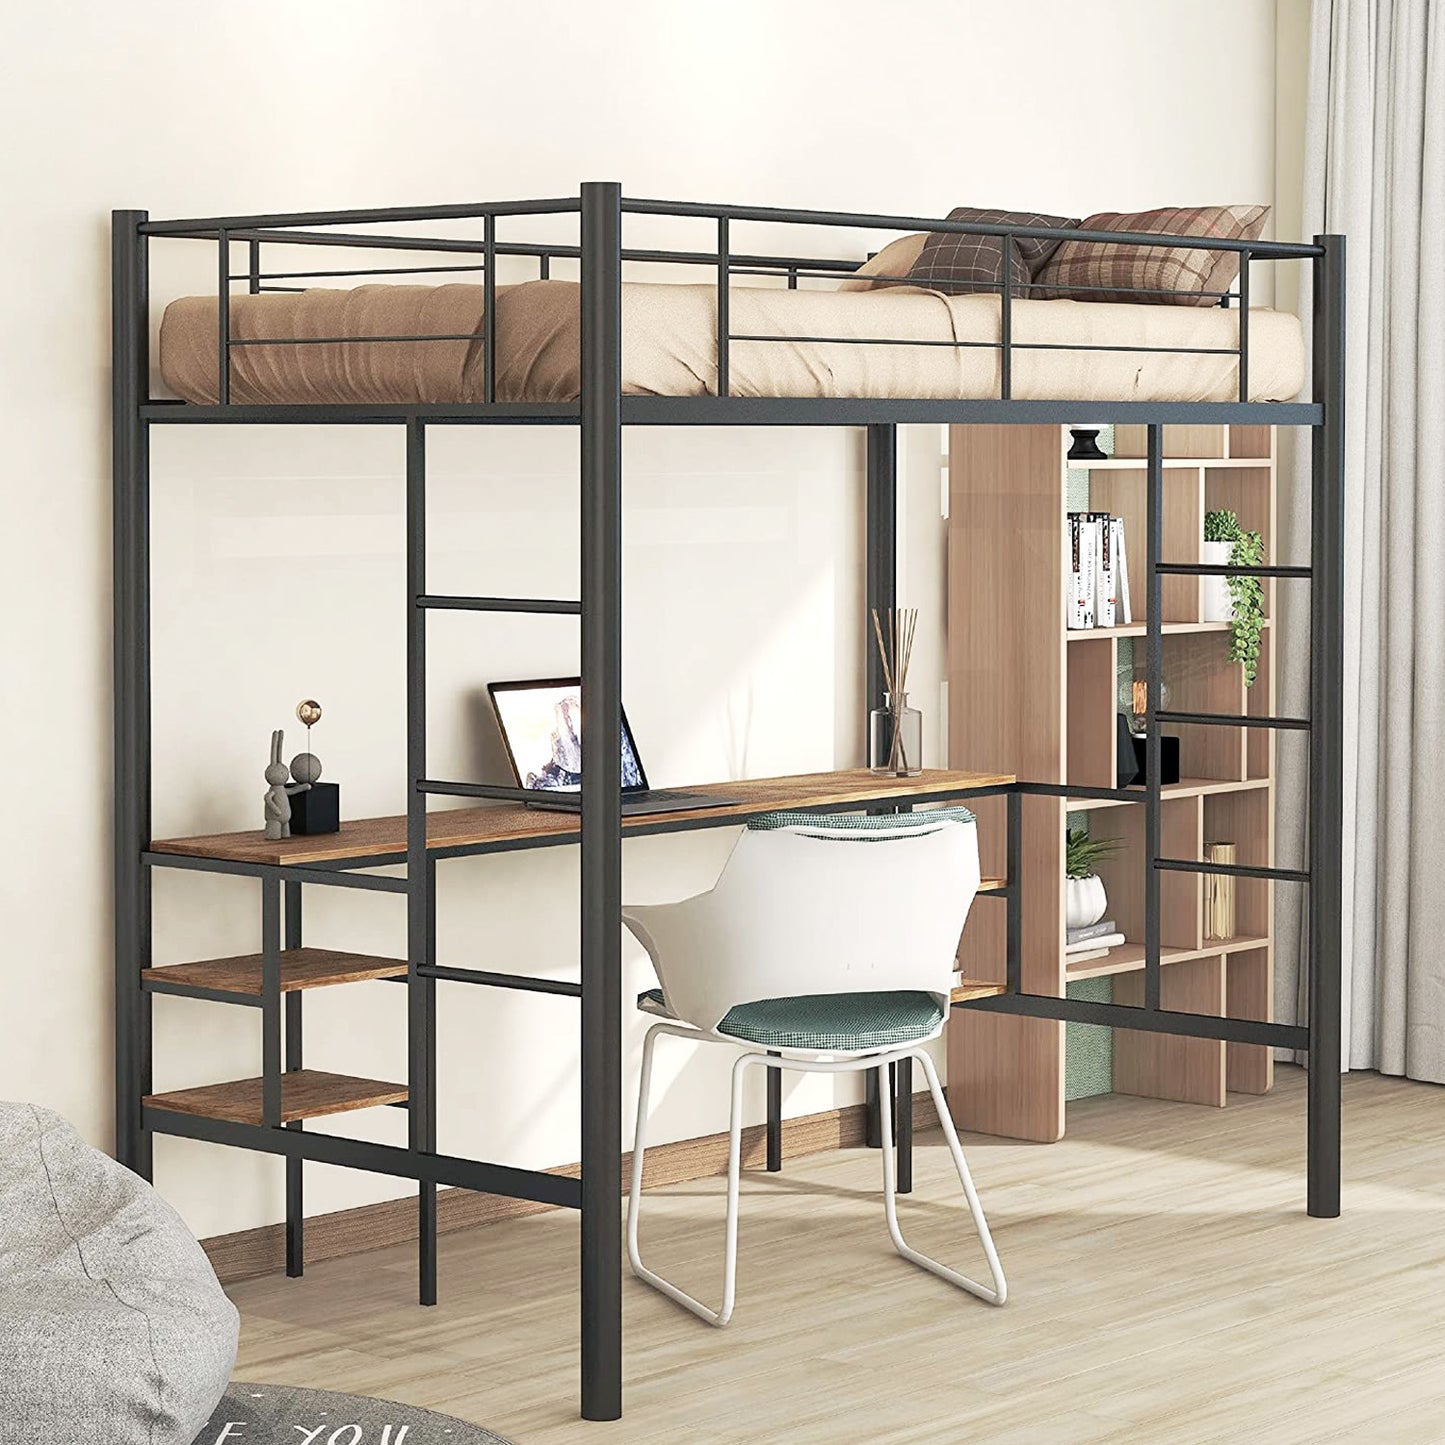 Twin Loft Bed Frame with Desk for Teens Kids, Classic Metal Bed Frames in Twin with Desk Ladder and Guardrails, Kids Bed Frame, Black, LJ503